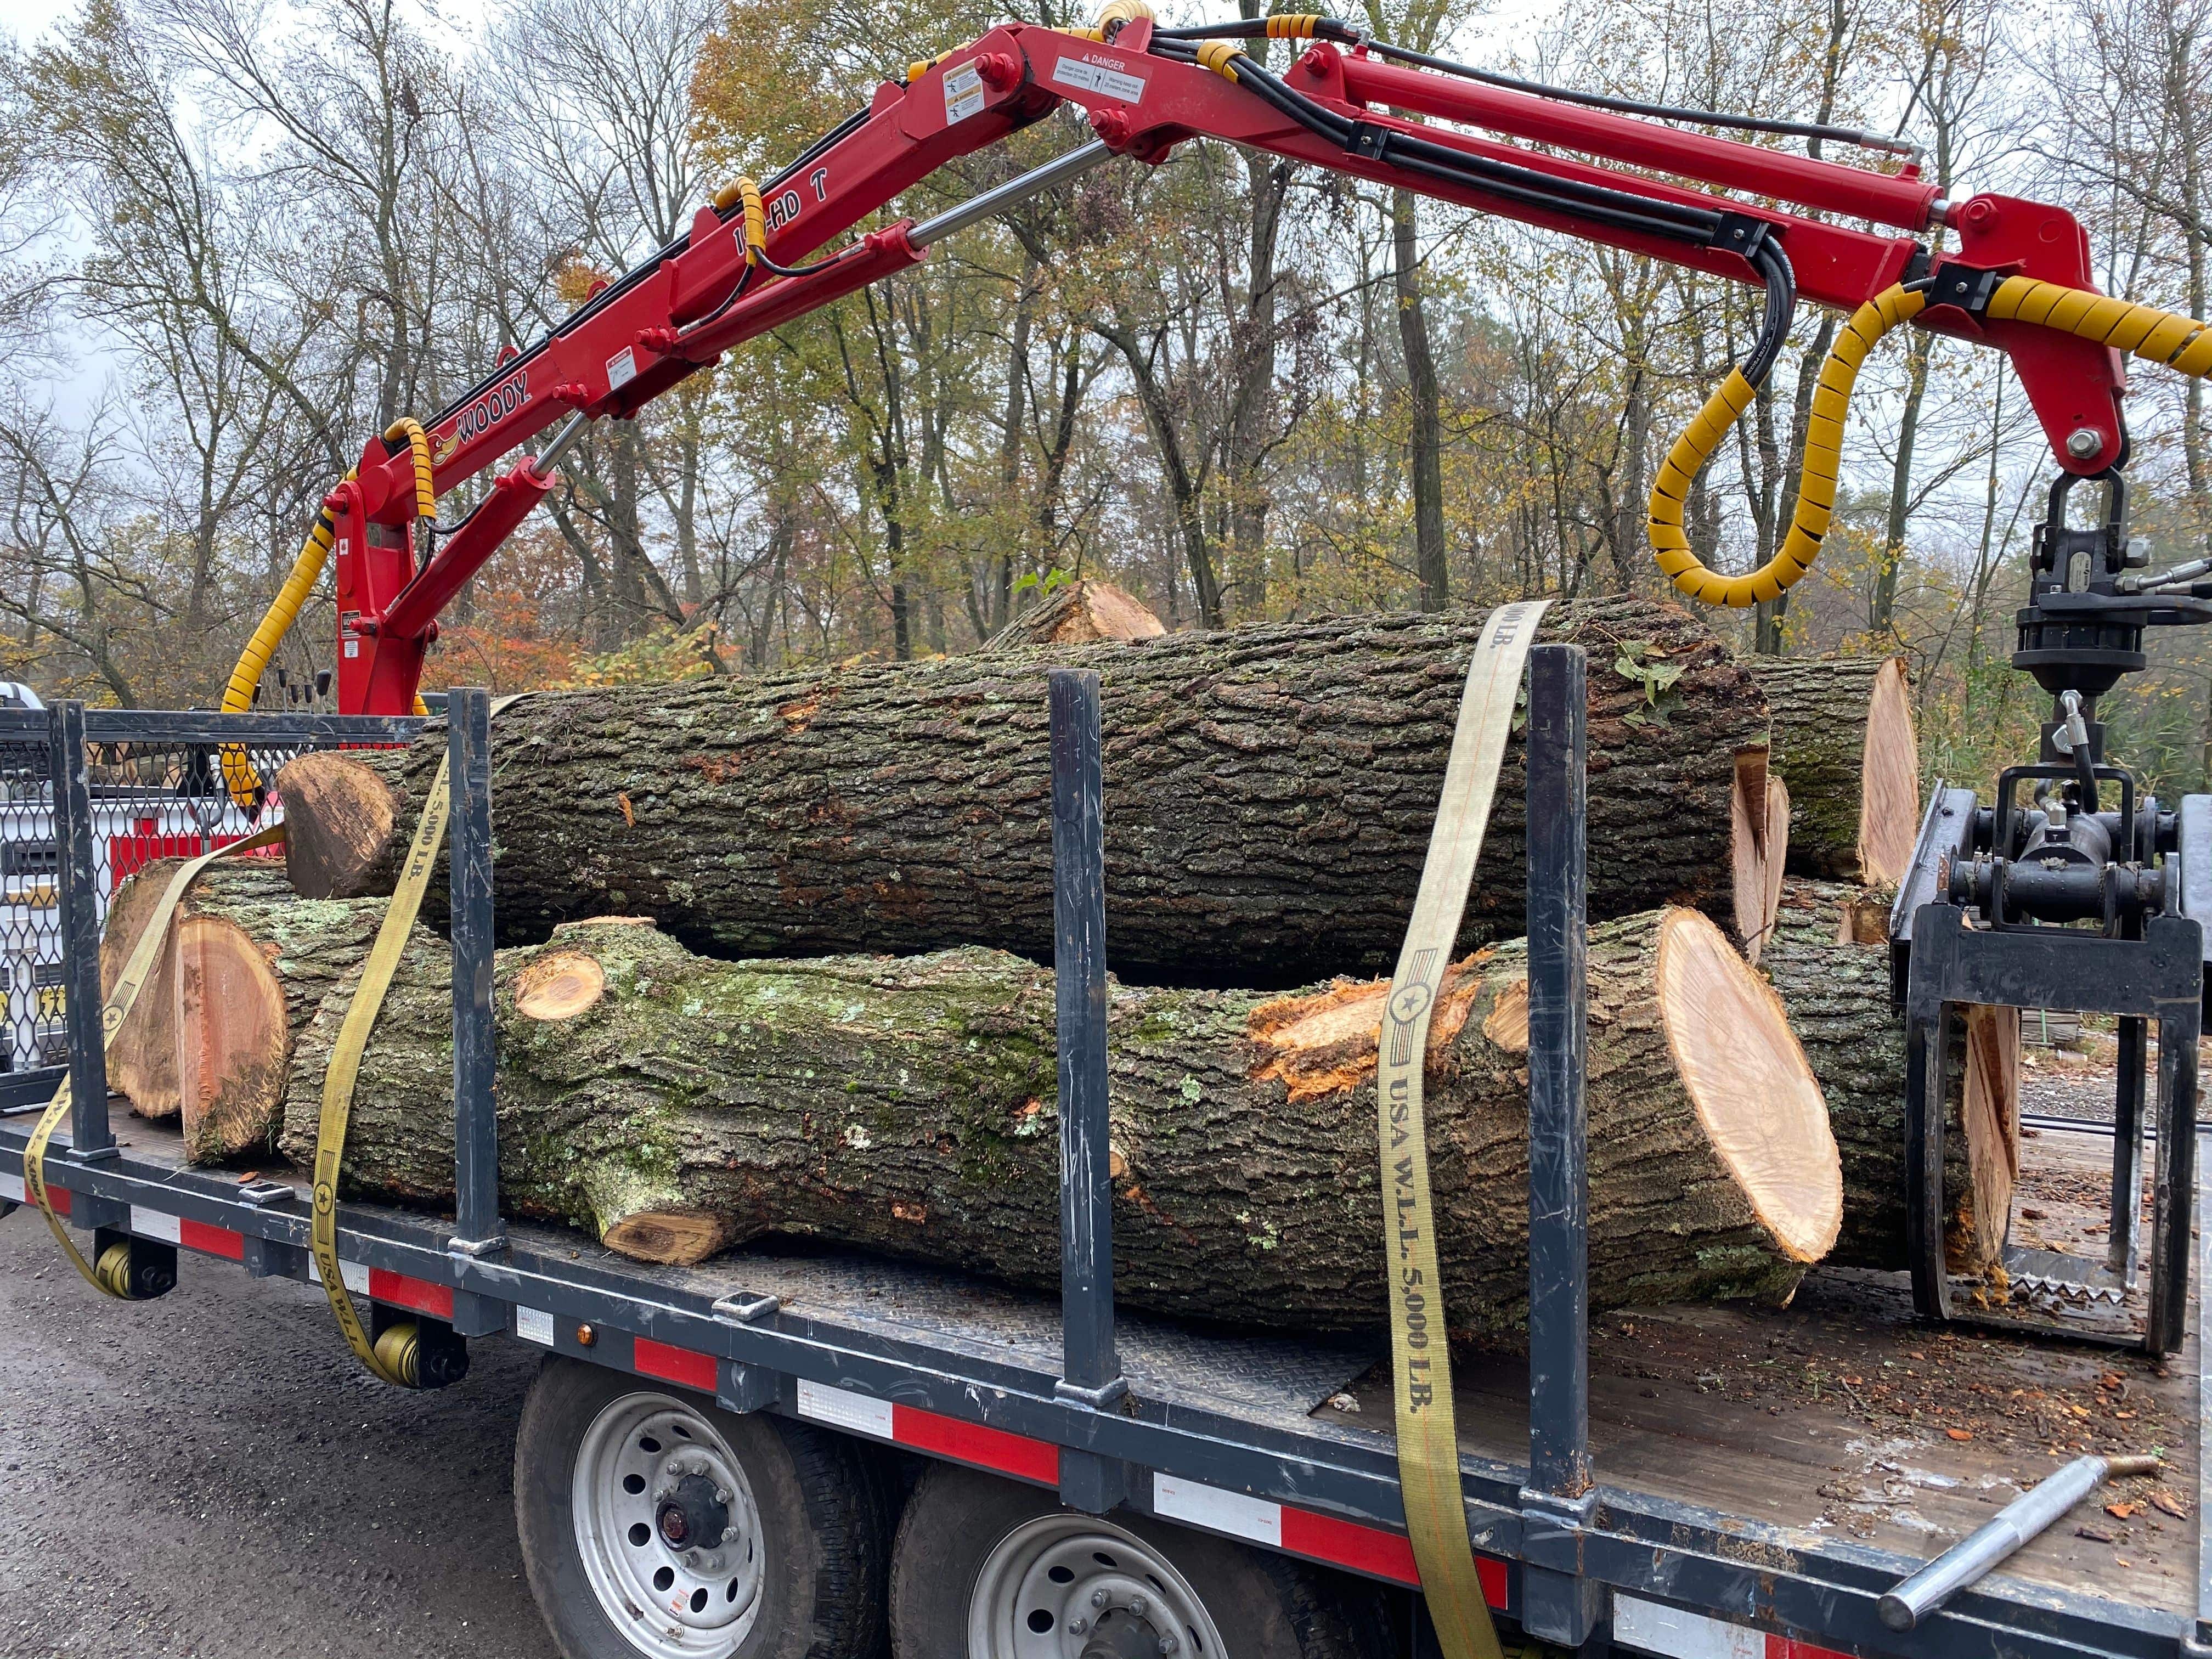 A Tree on a Flatbed Truck